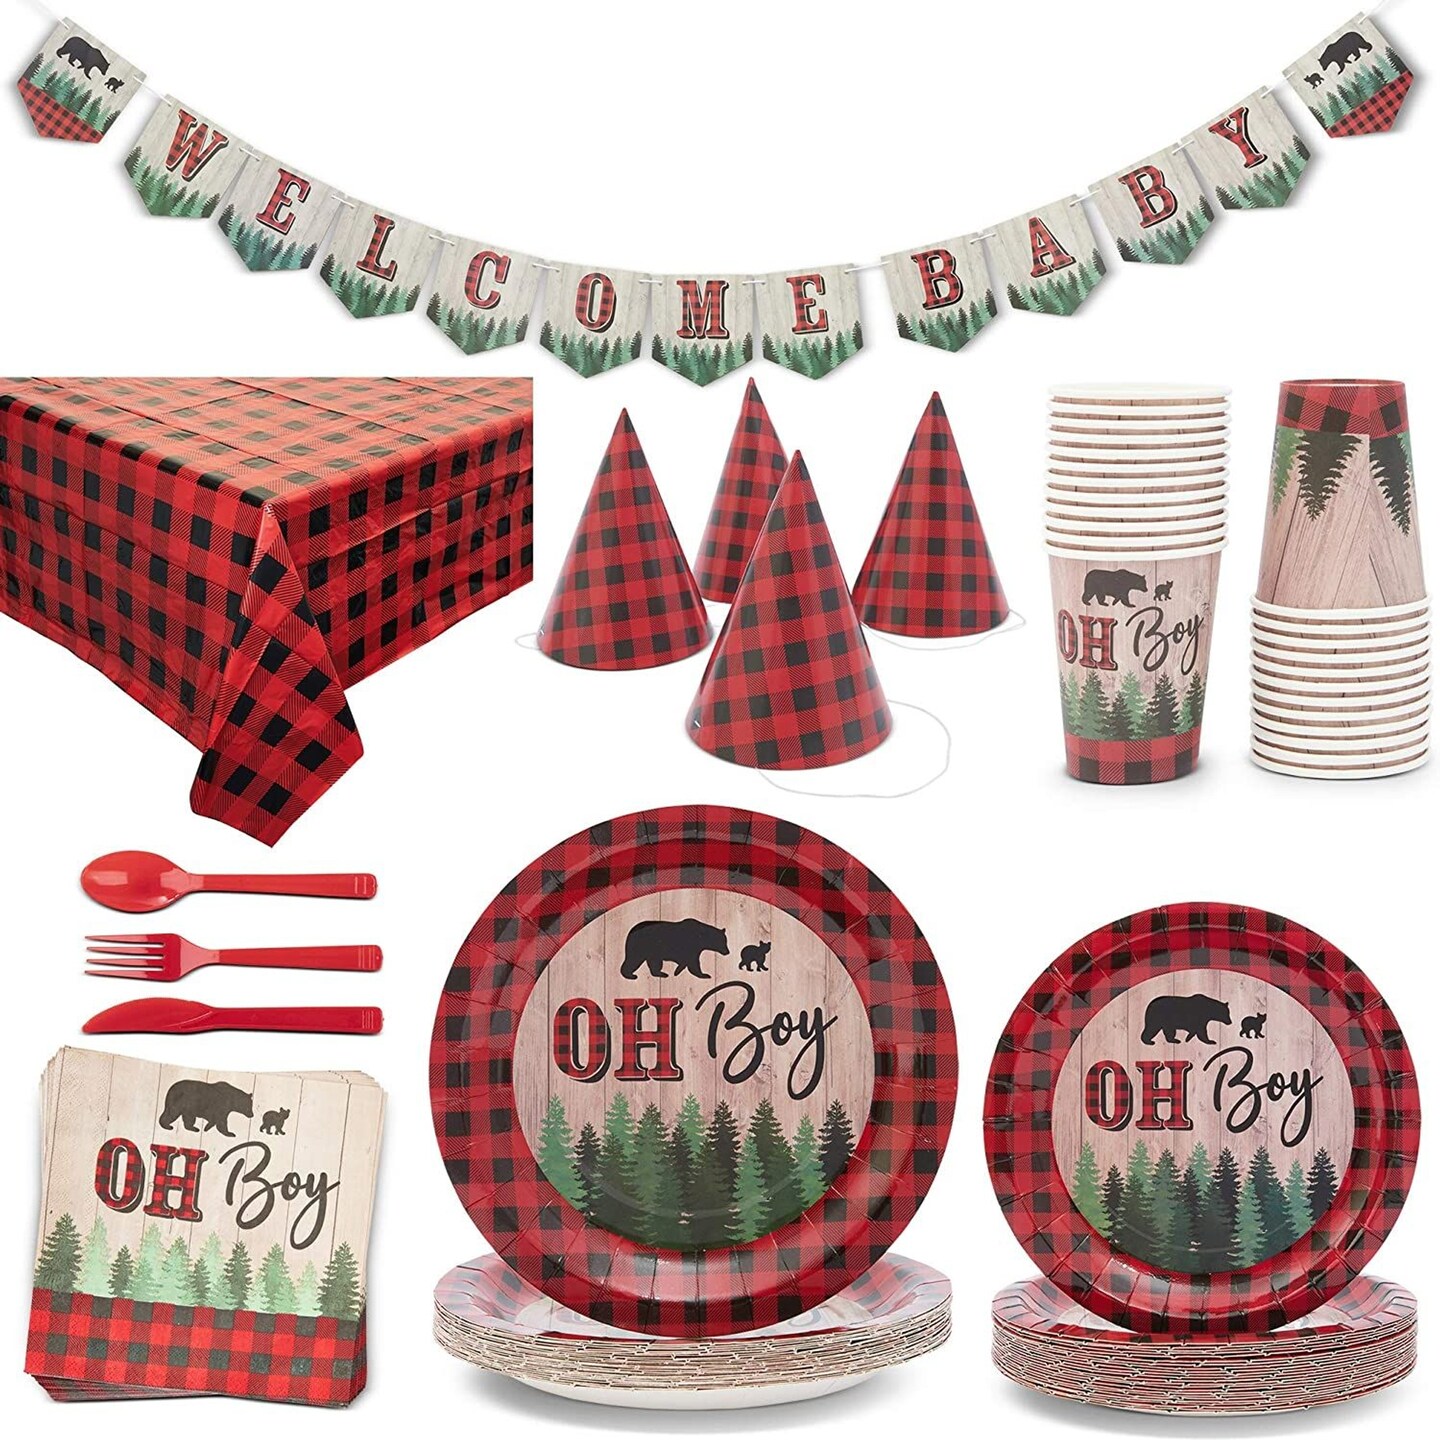 194 Piece Lumberjack Baby Shower Decorations for Boy - Oh Boy Buffalo Plaid Party Supplies with Plates, Napkins, Tablecloth, Hats, Banner (Serves 24)